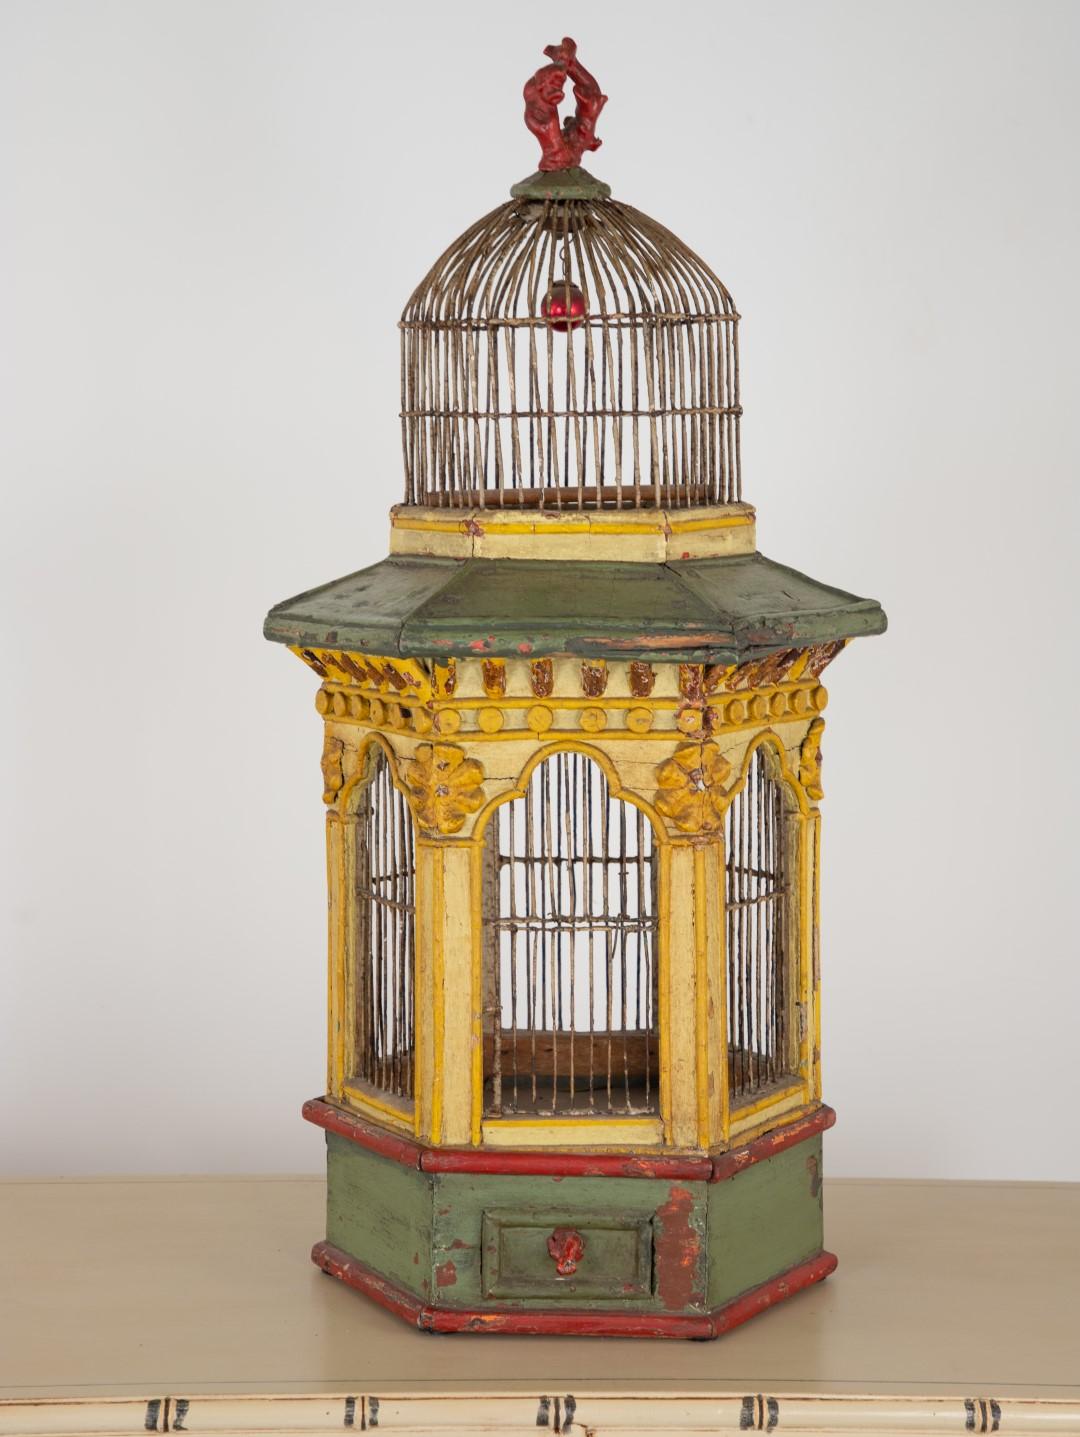 An English polychrome yellow, green, and red painted wire pagoda birdcage, circa 1820.